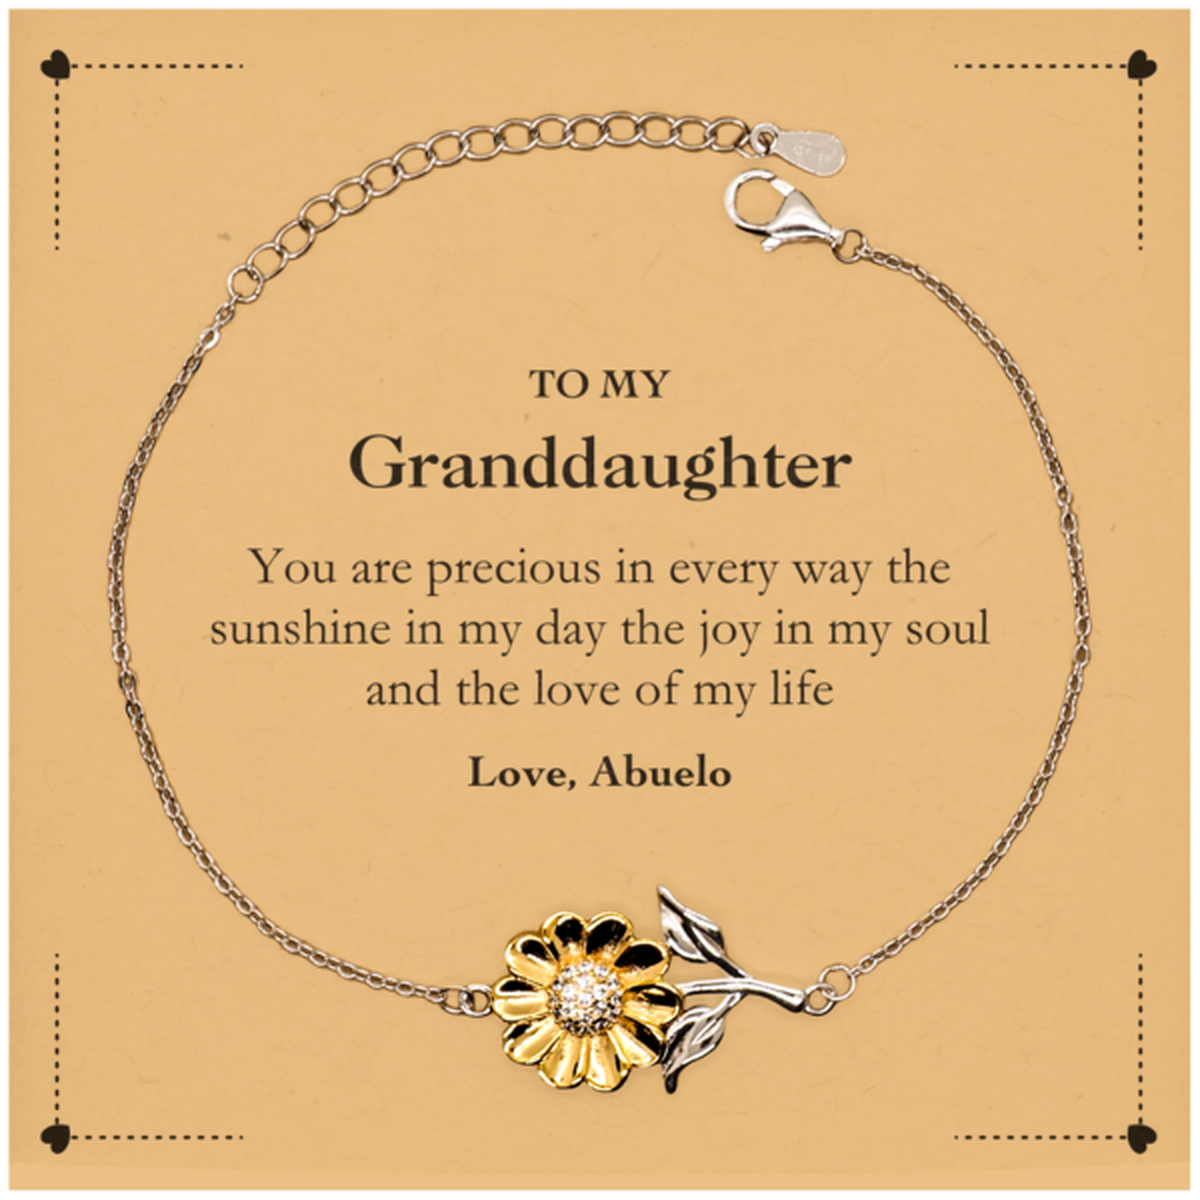 Graduation Gifts for Granddaughter Sunflower Bracelet Present from Abuelo, Christmas Granddaughter Birthday Gifts Granddaughter You are precious in every way the sunshine in my day. Love, Abuelo